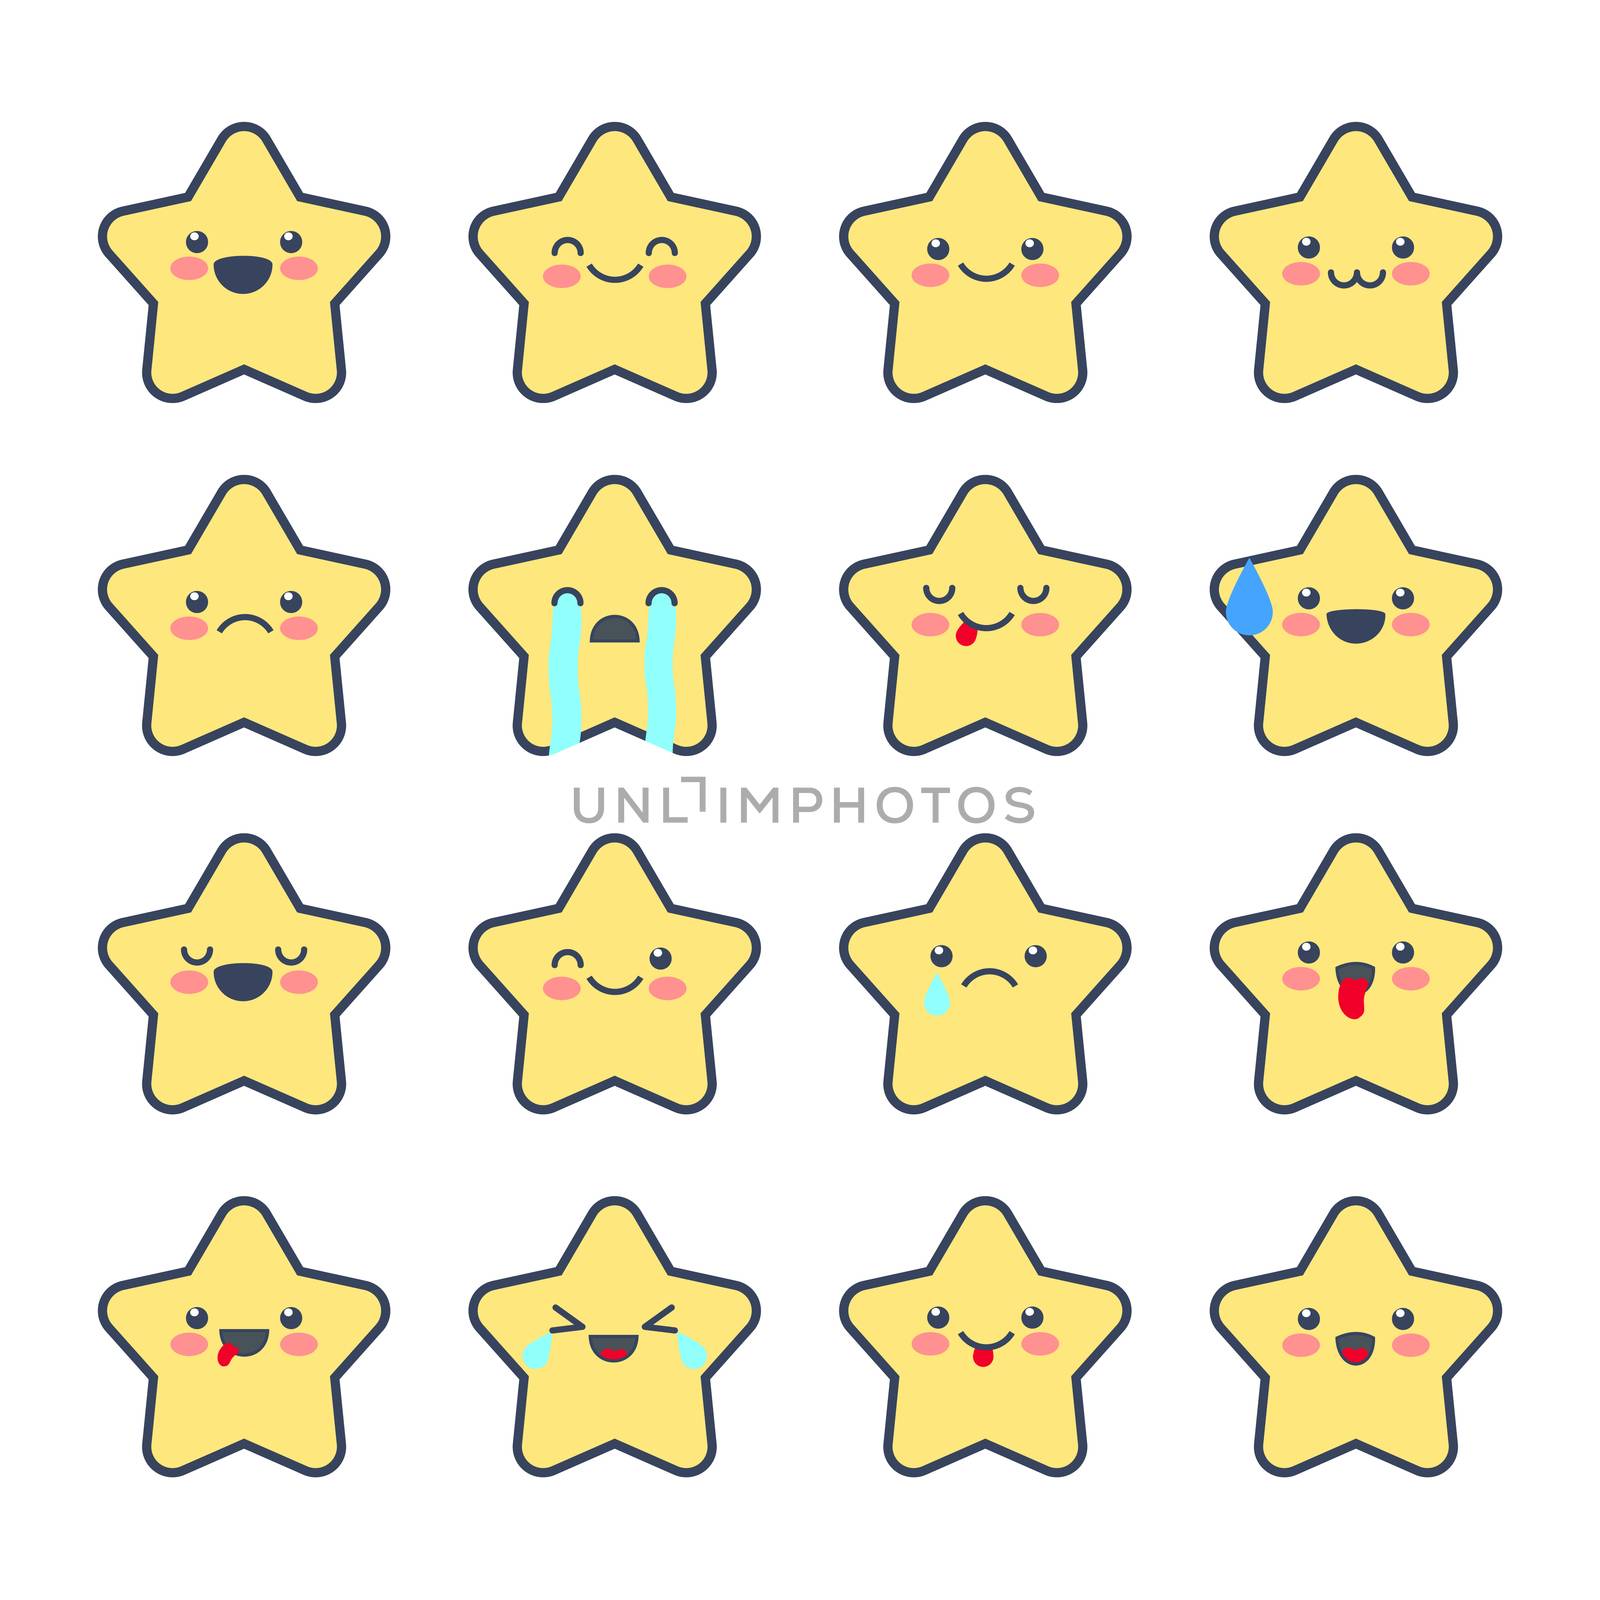 Set Emoji icons for applications and chat. Emoticons with different emotions isolated on white background. Large collection of star smiles.